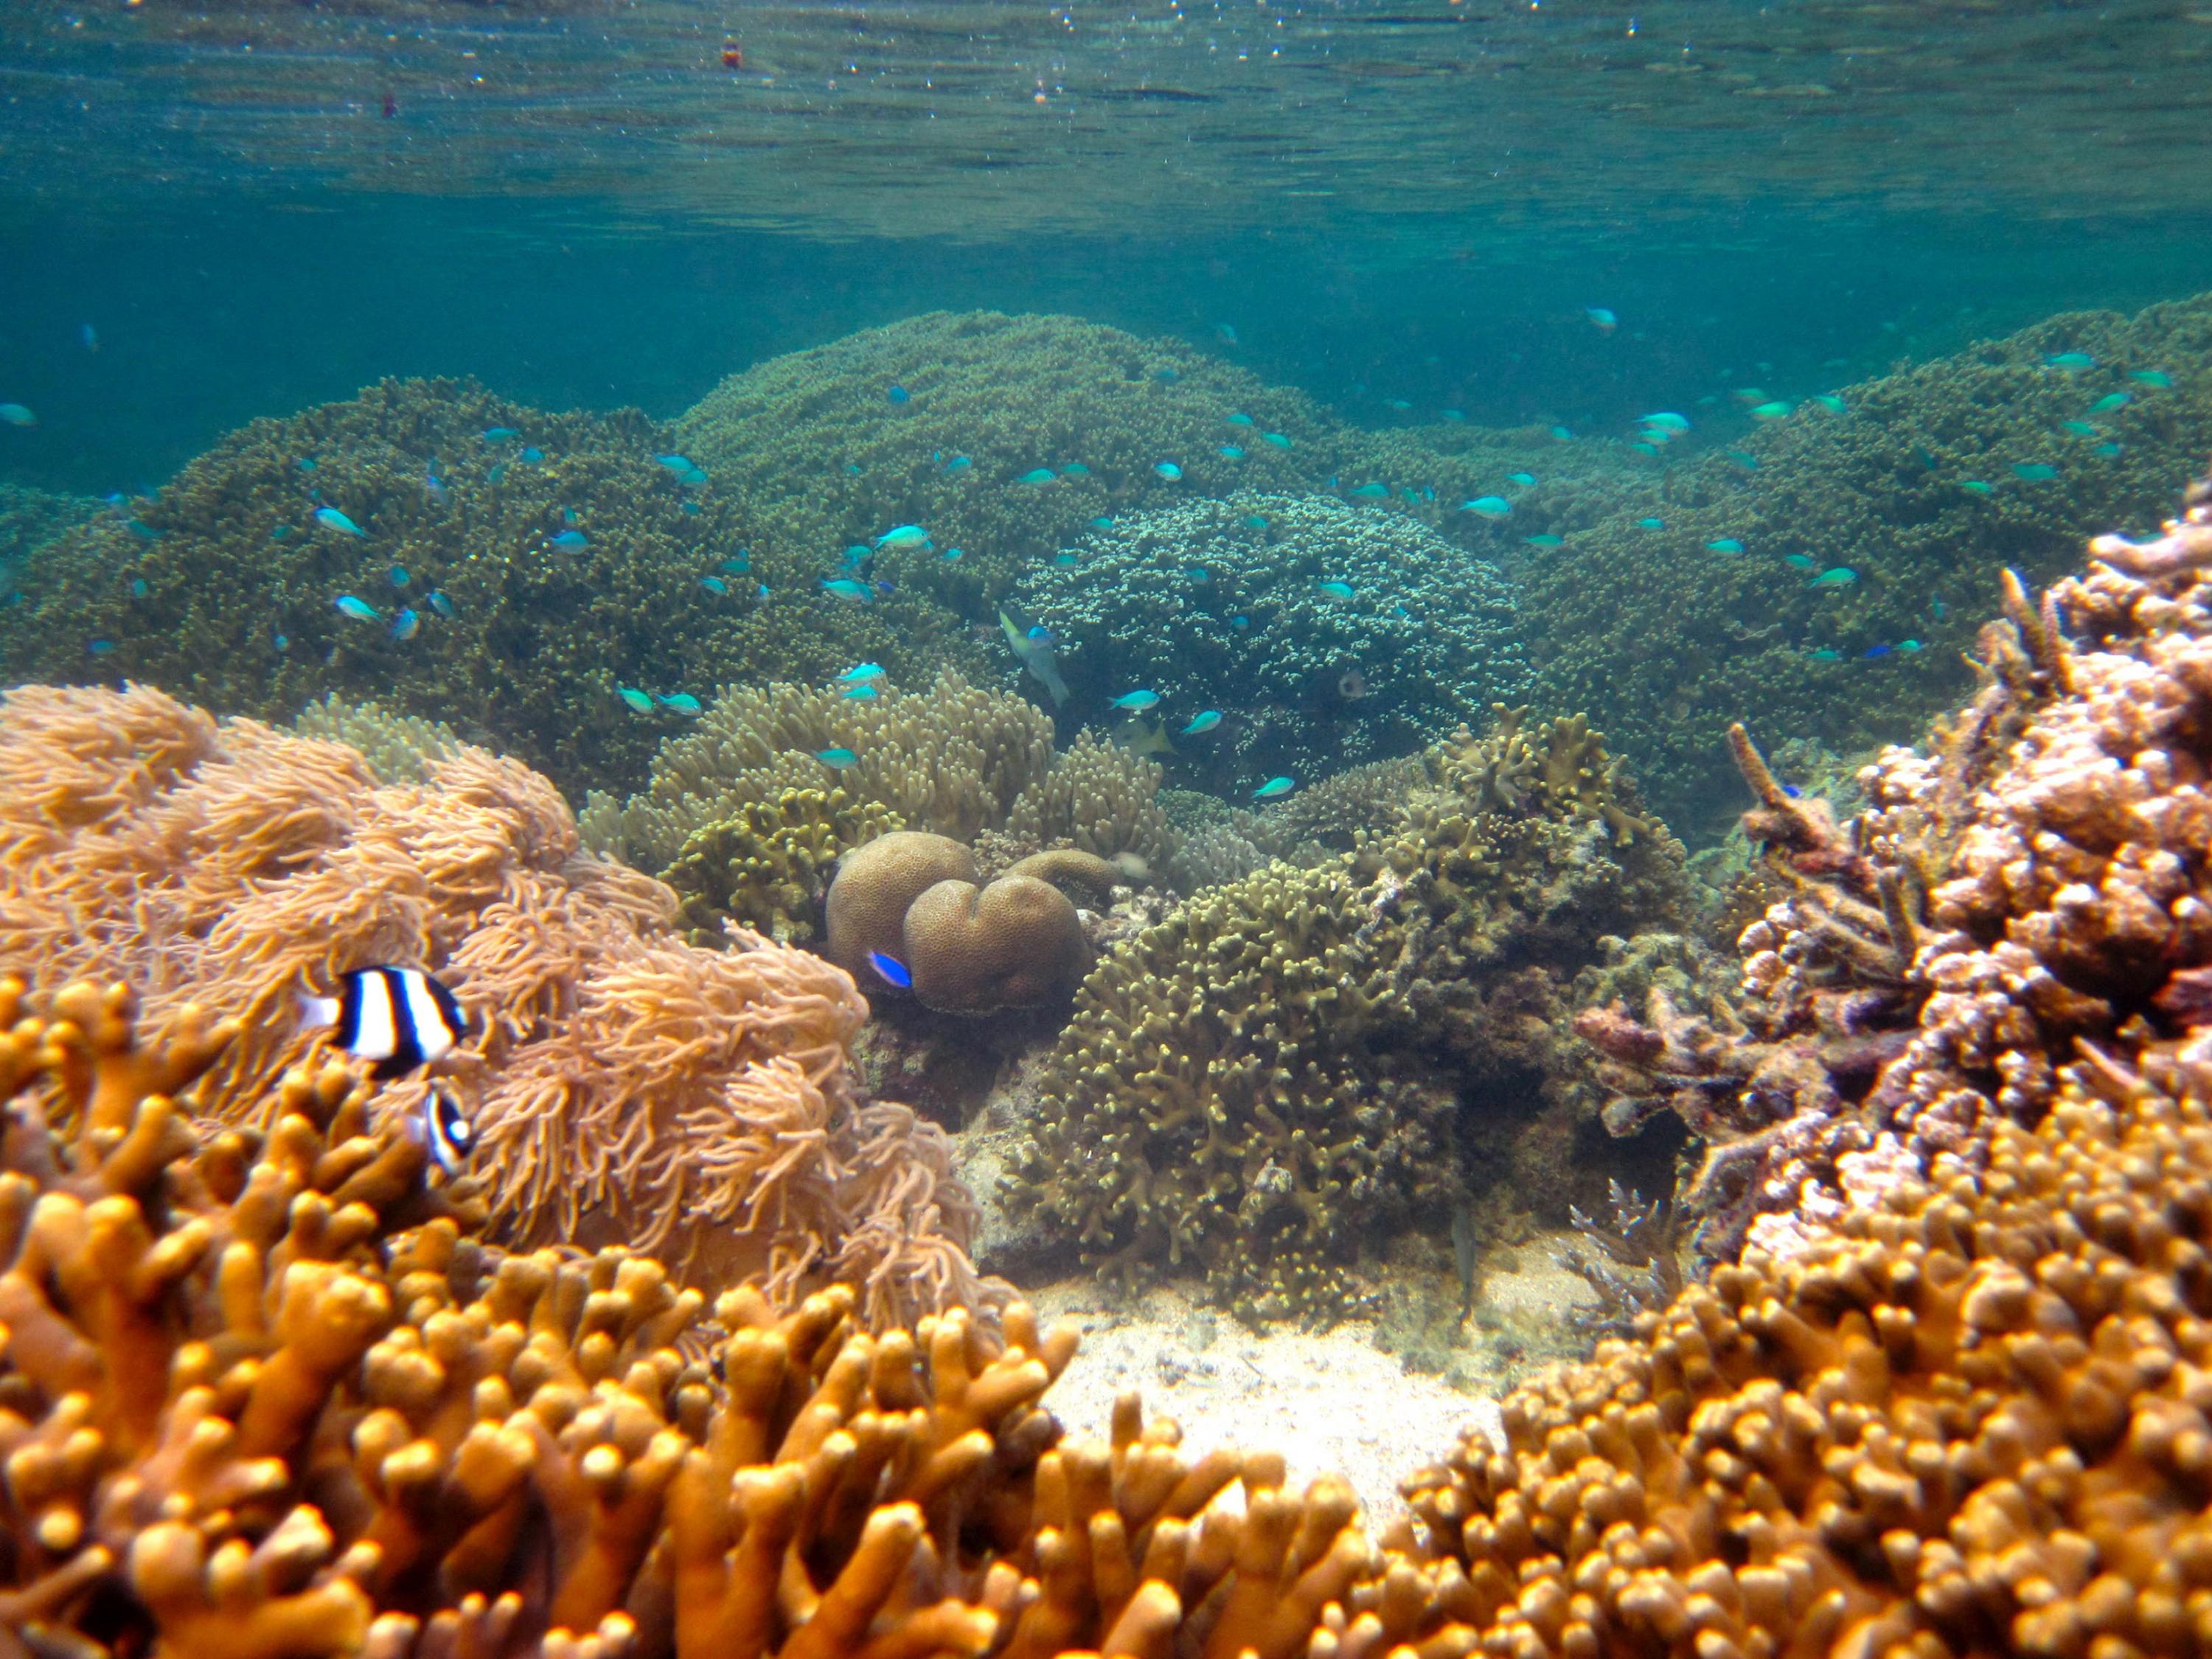 Fishes and healthy coral show the benefits of marine protected areas designed to protect reef ecosystems. (Credit: Cody Clements, Georgia Tech)